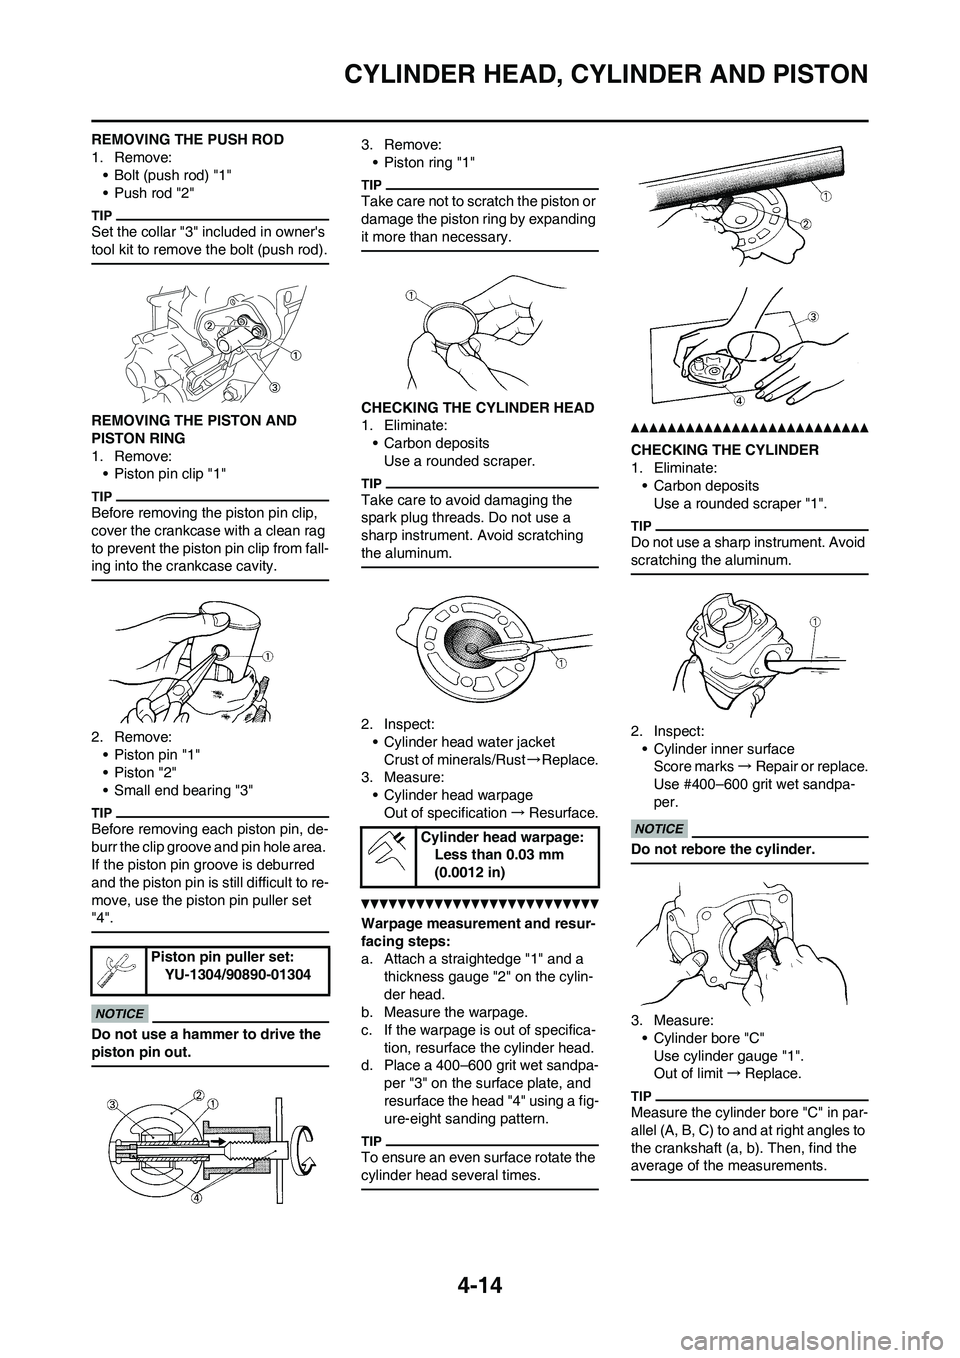 YAMAHA YZ125LC 2011  Owners Manual 4-14
CYLINDER HEAD, CYLINDER AND PISTON
REMOVING THE PUSH ROD
1. Remove:
• Bolt (push rod) "1"
• Push rod "2"
Set the collar "3" included in owners 
tool kit to remove the bolt (push rod).
REMOVI